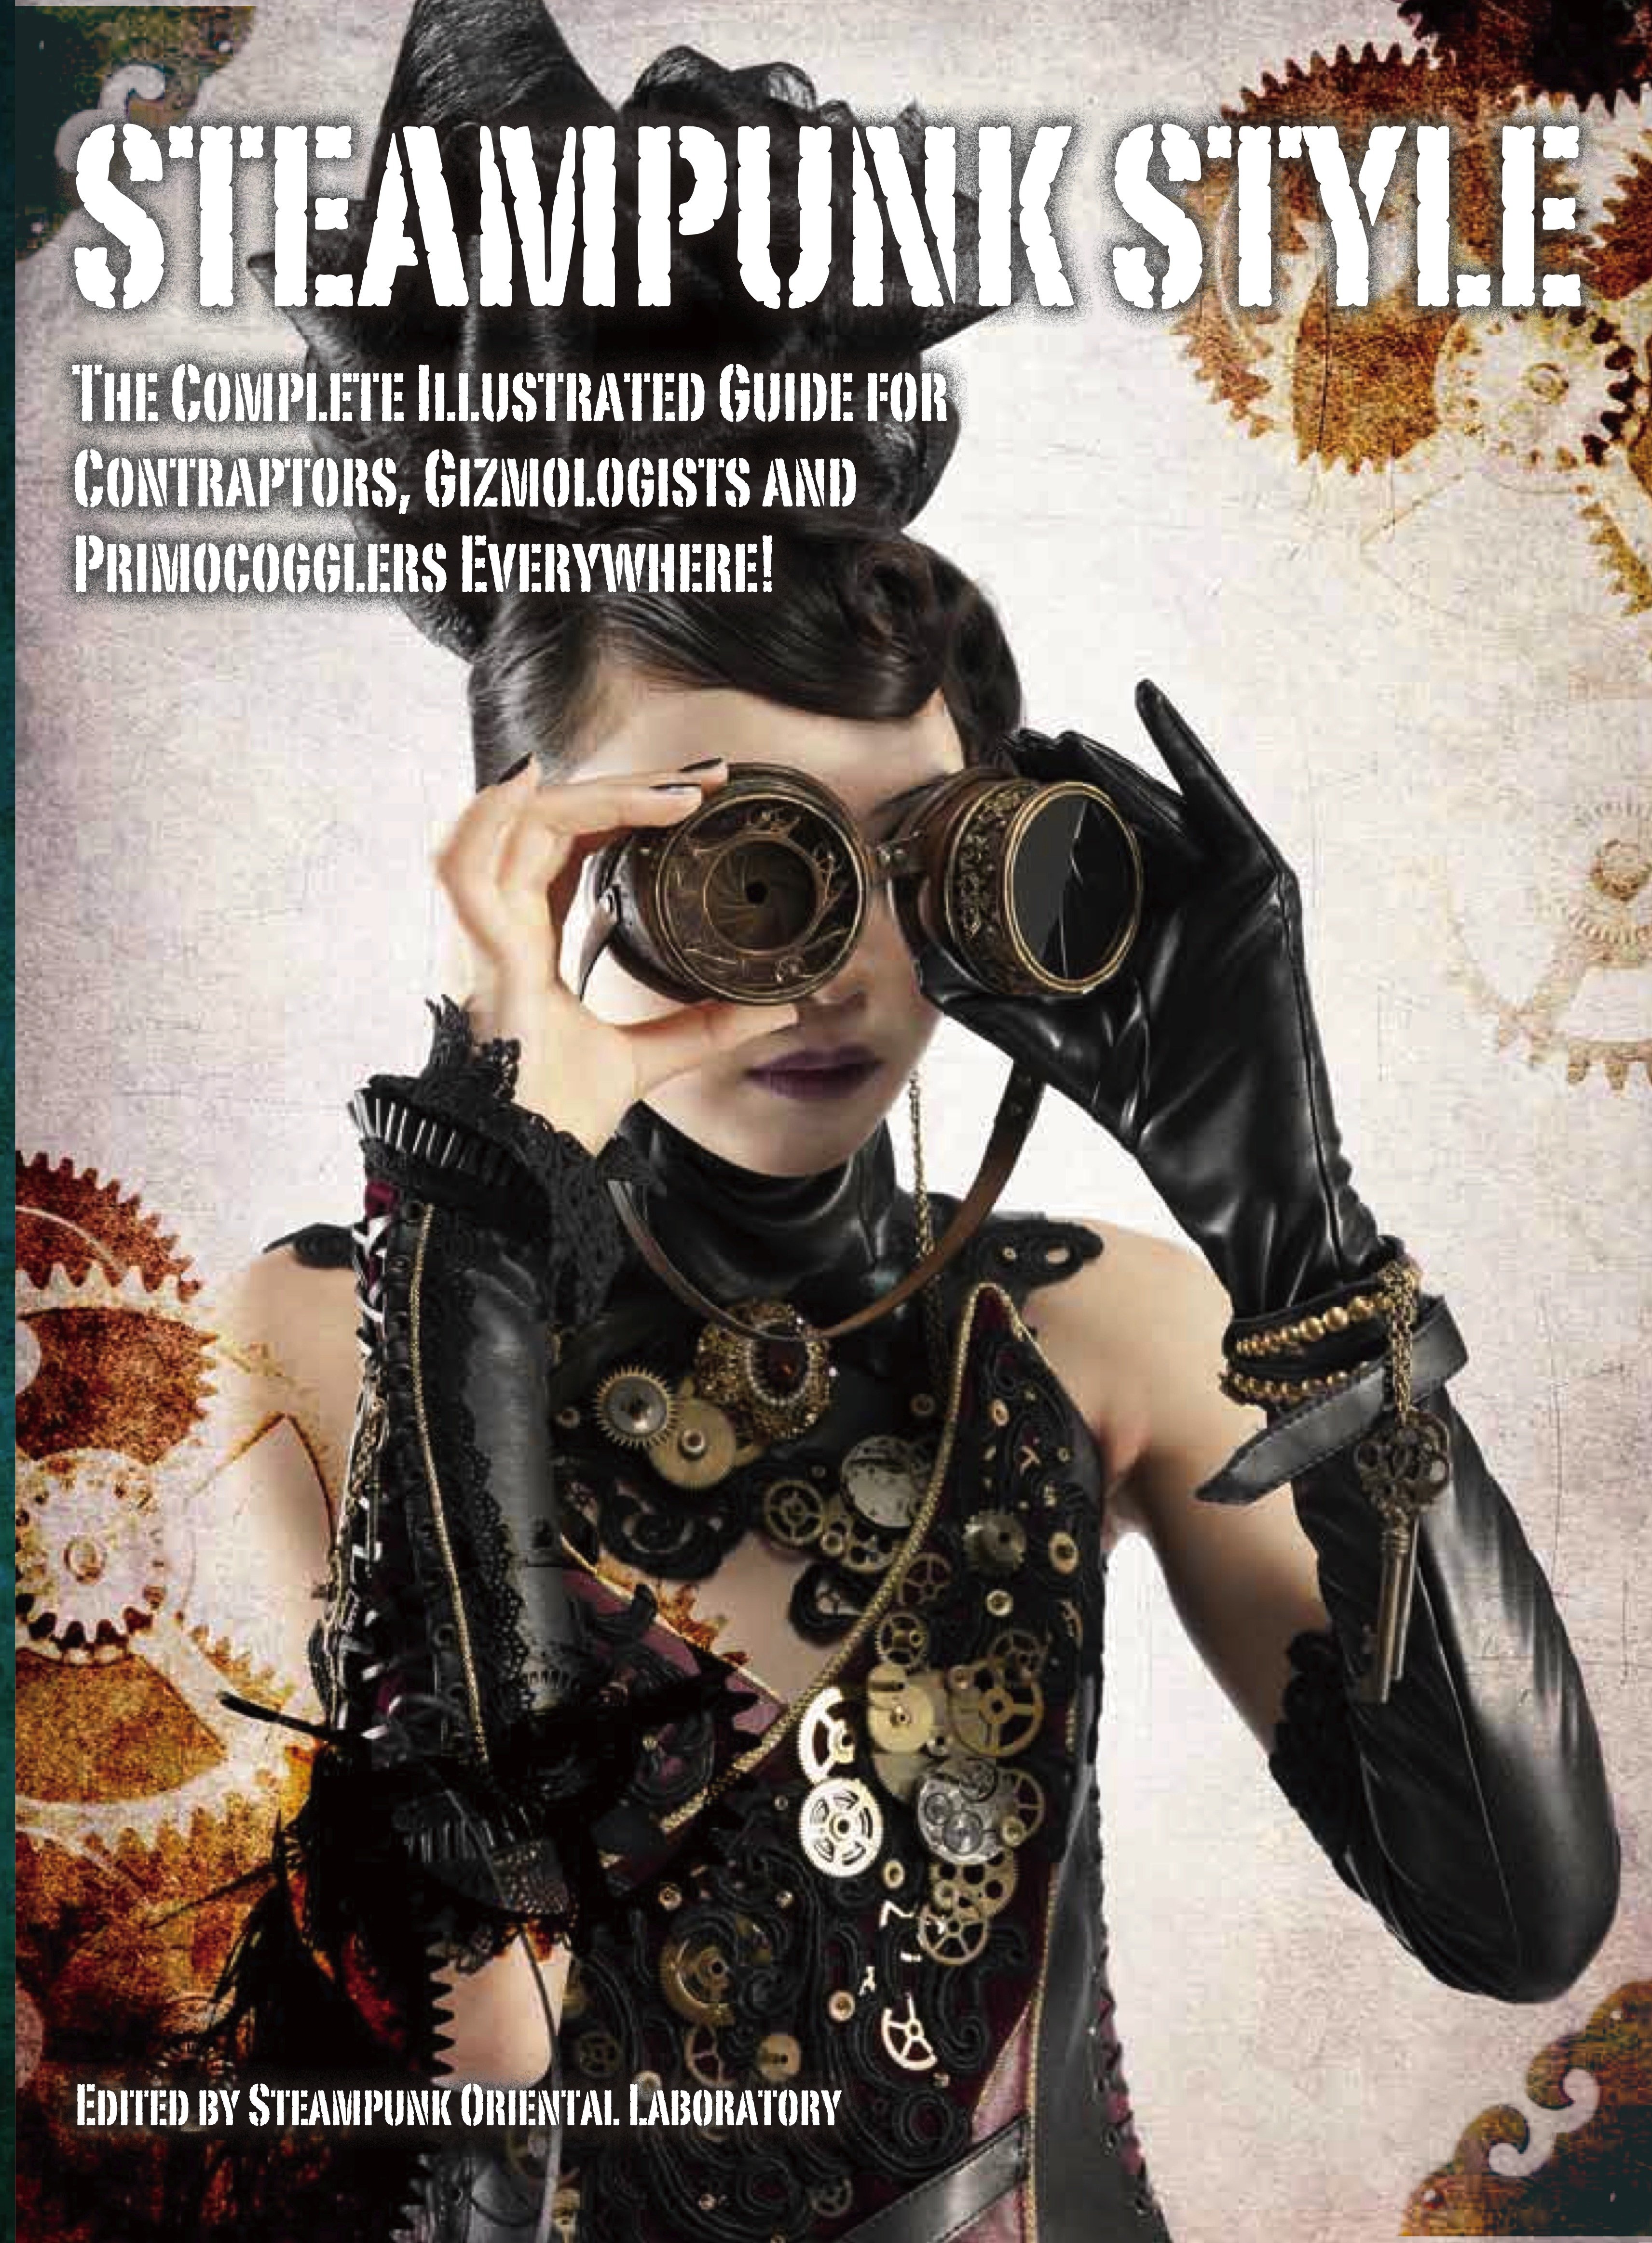 Steampunk Style: The Complete Illustrated Guide for Contraptors, Gizmologists and Primocogglers Everywhere! 